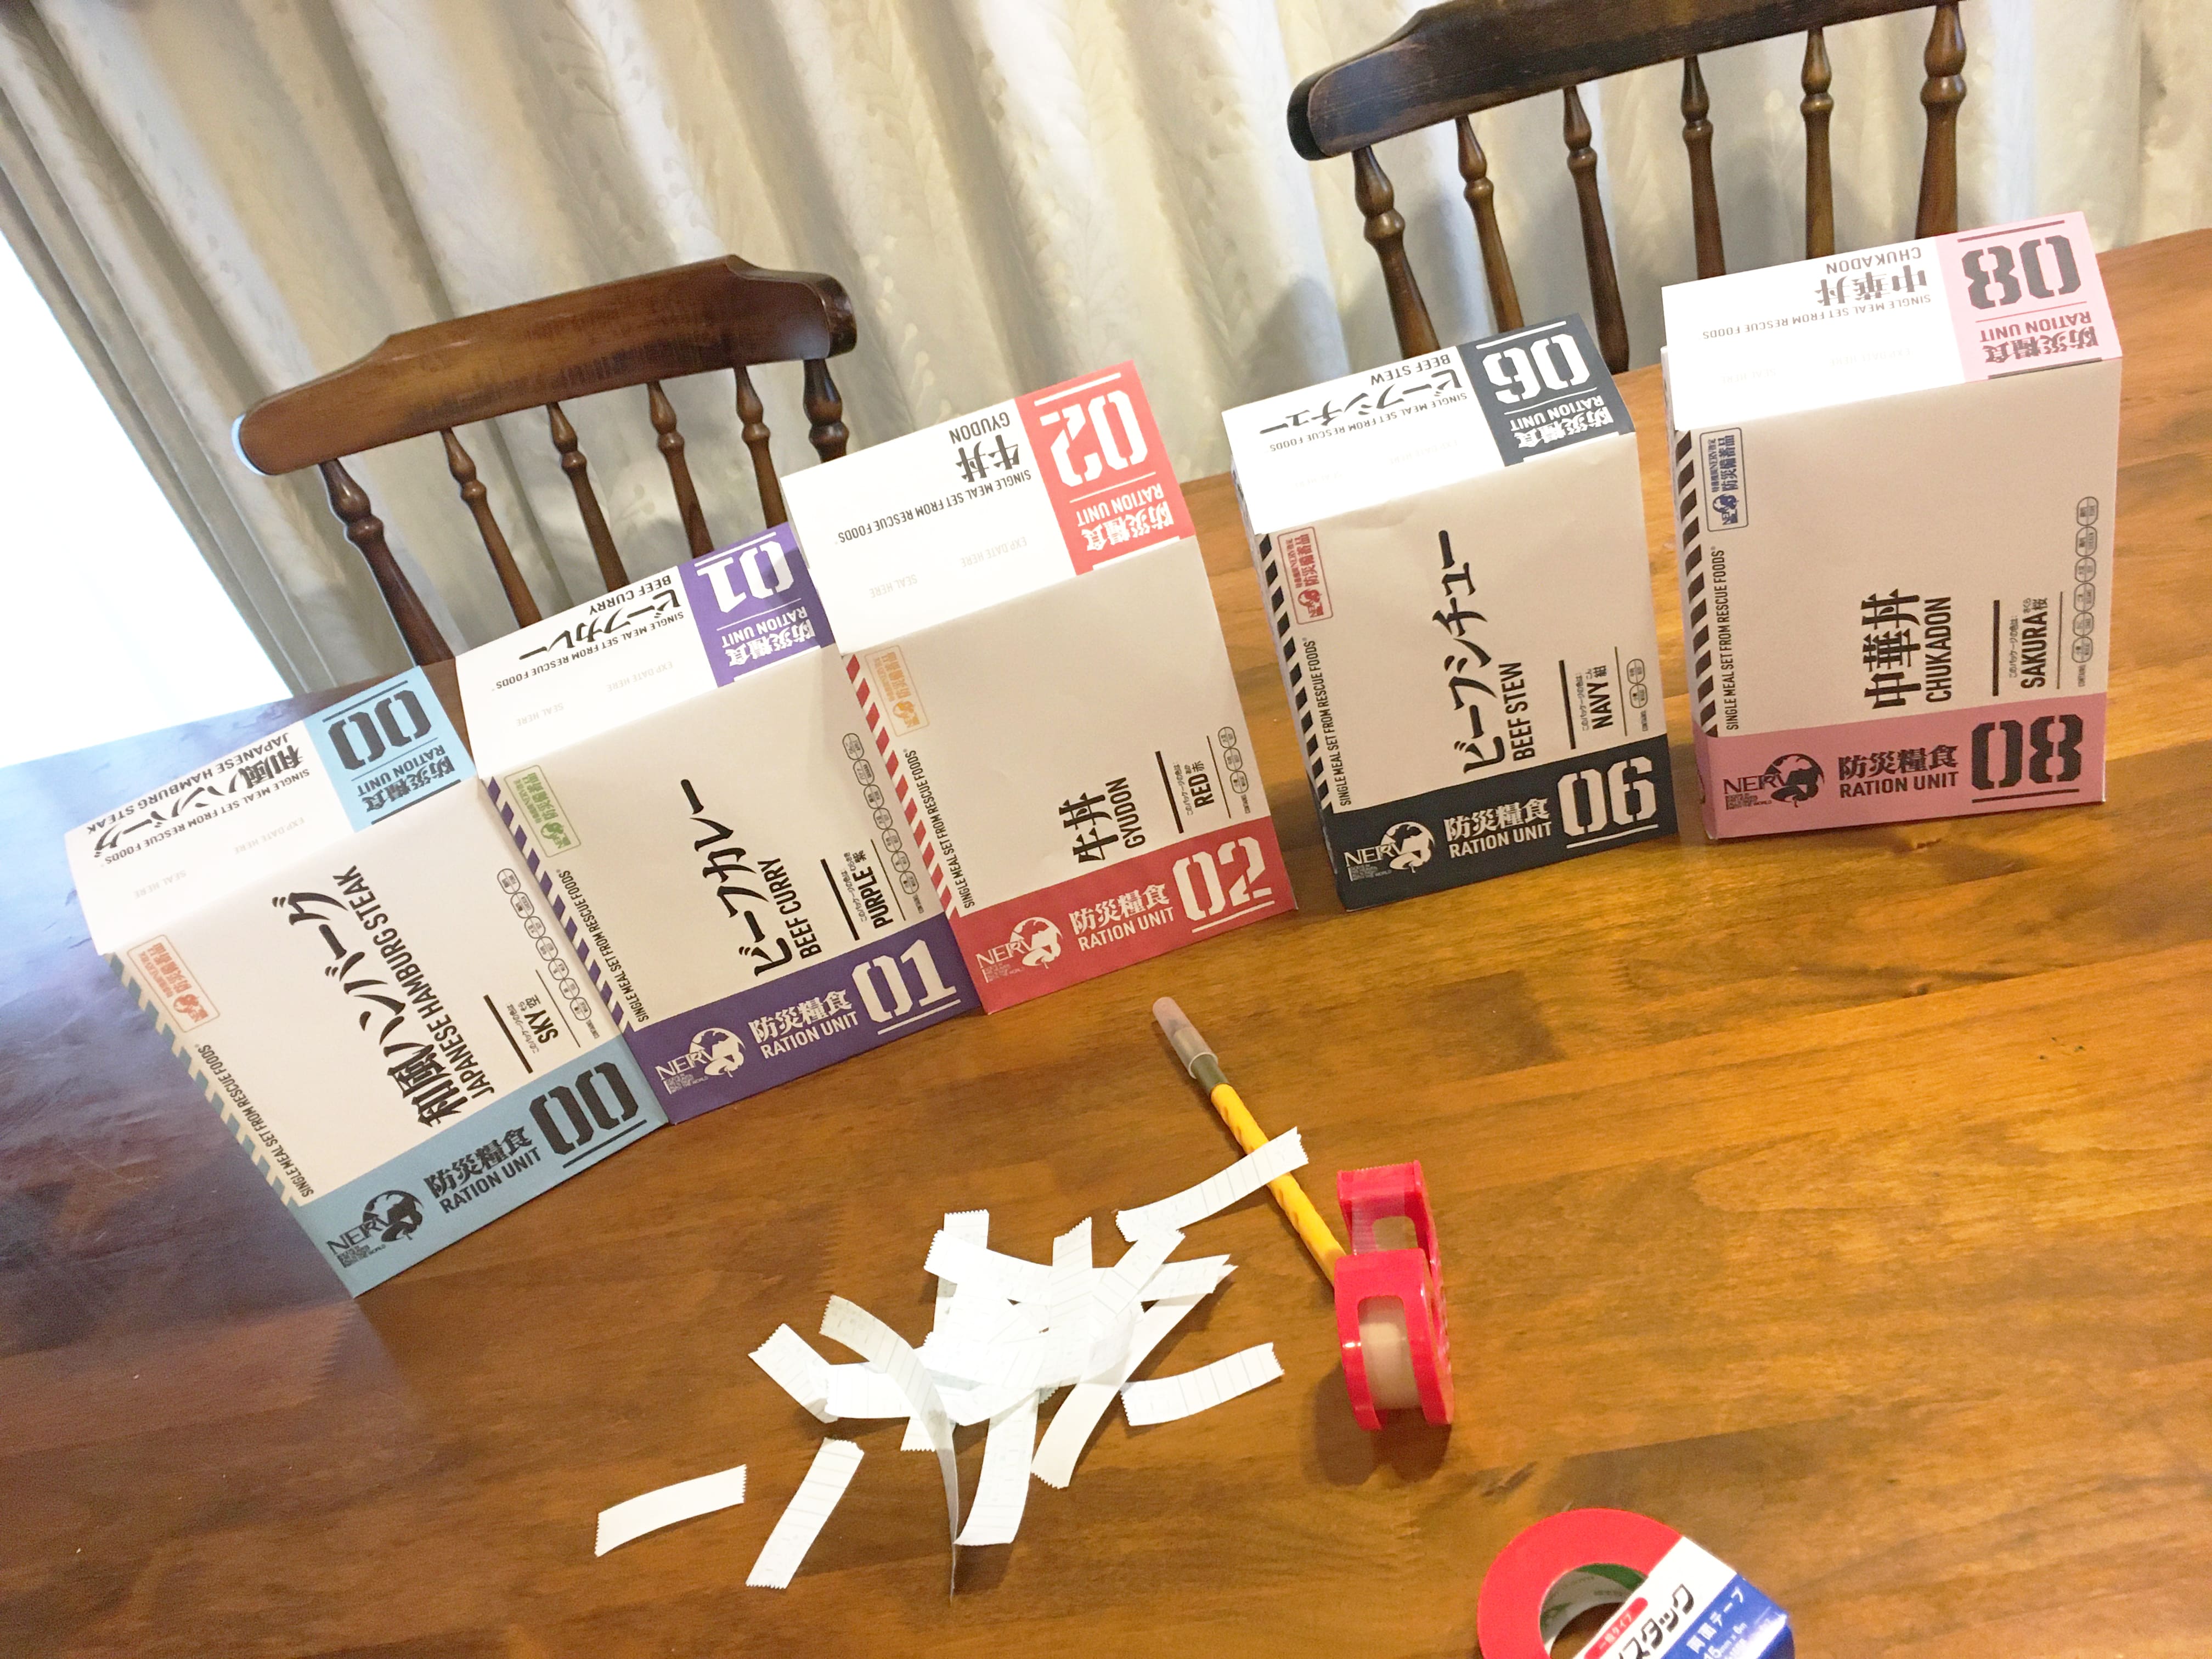 Early packaging prototypes being crafted to look like each of the Eva units (photo by Sakuragi)